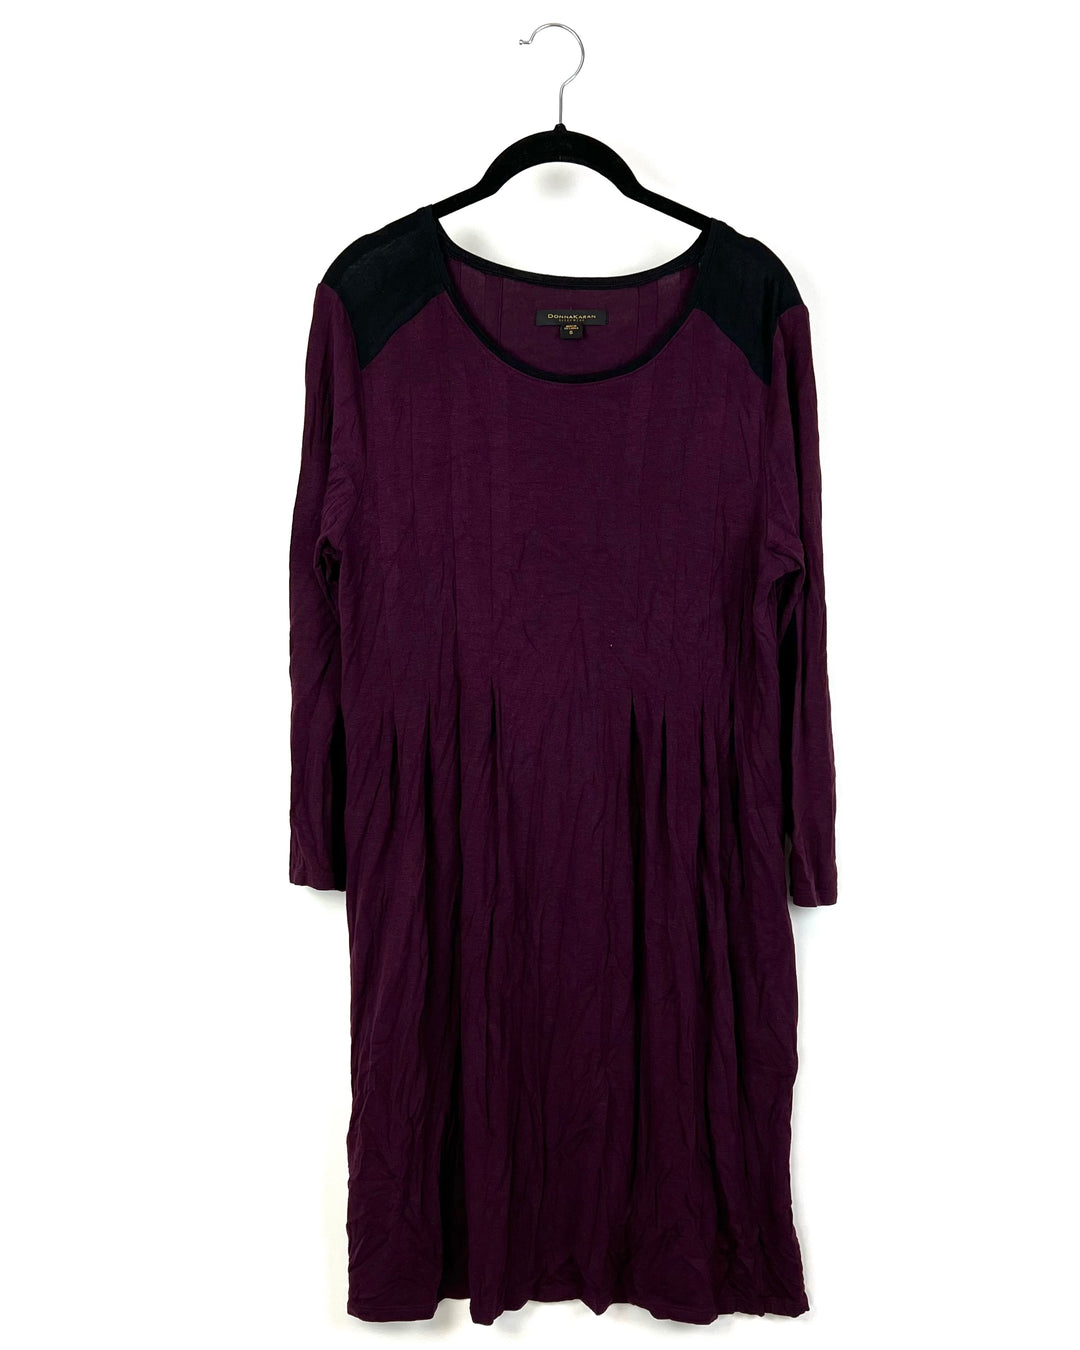 Maroon Long-Sleeve Nightgown With Black Color Blocks - Small